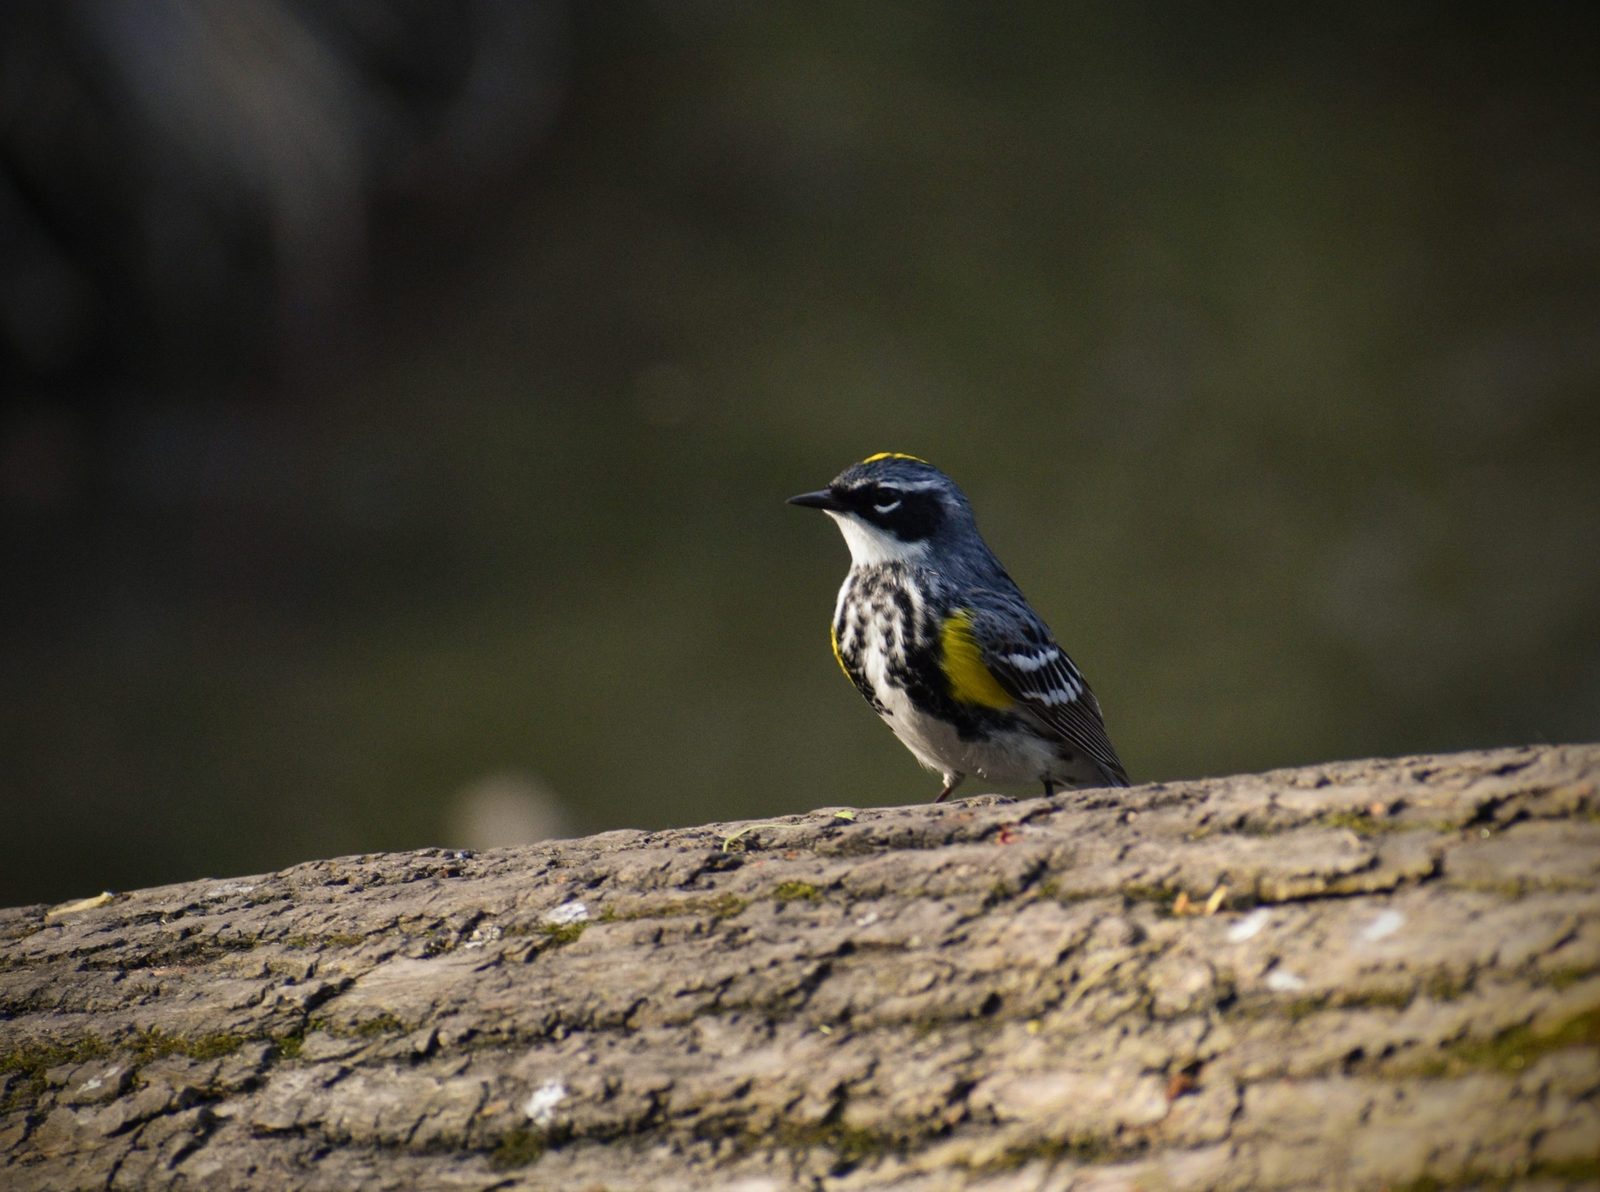 Yellow-Rumped Warblers can be found all over the arb, quickly fluttering around tree to tree in the early fall and late spring. This little guy finally rested on a log, posing like a model, so I could get his photograph.